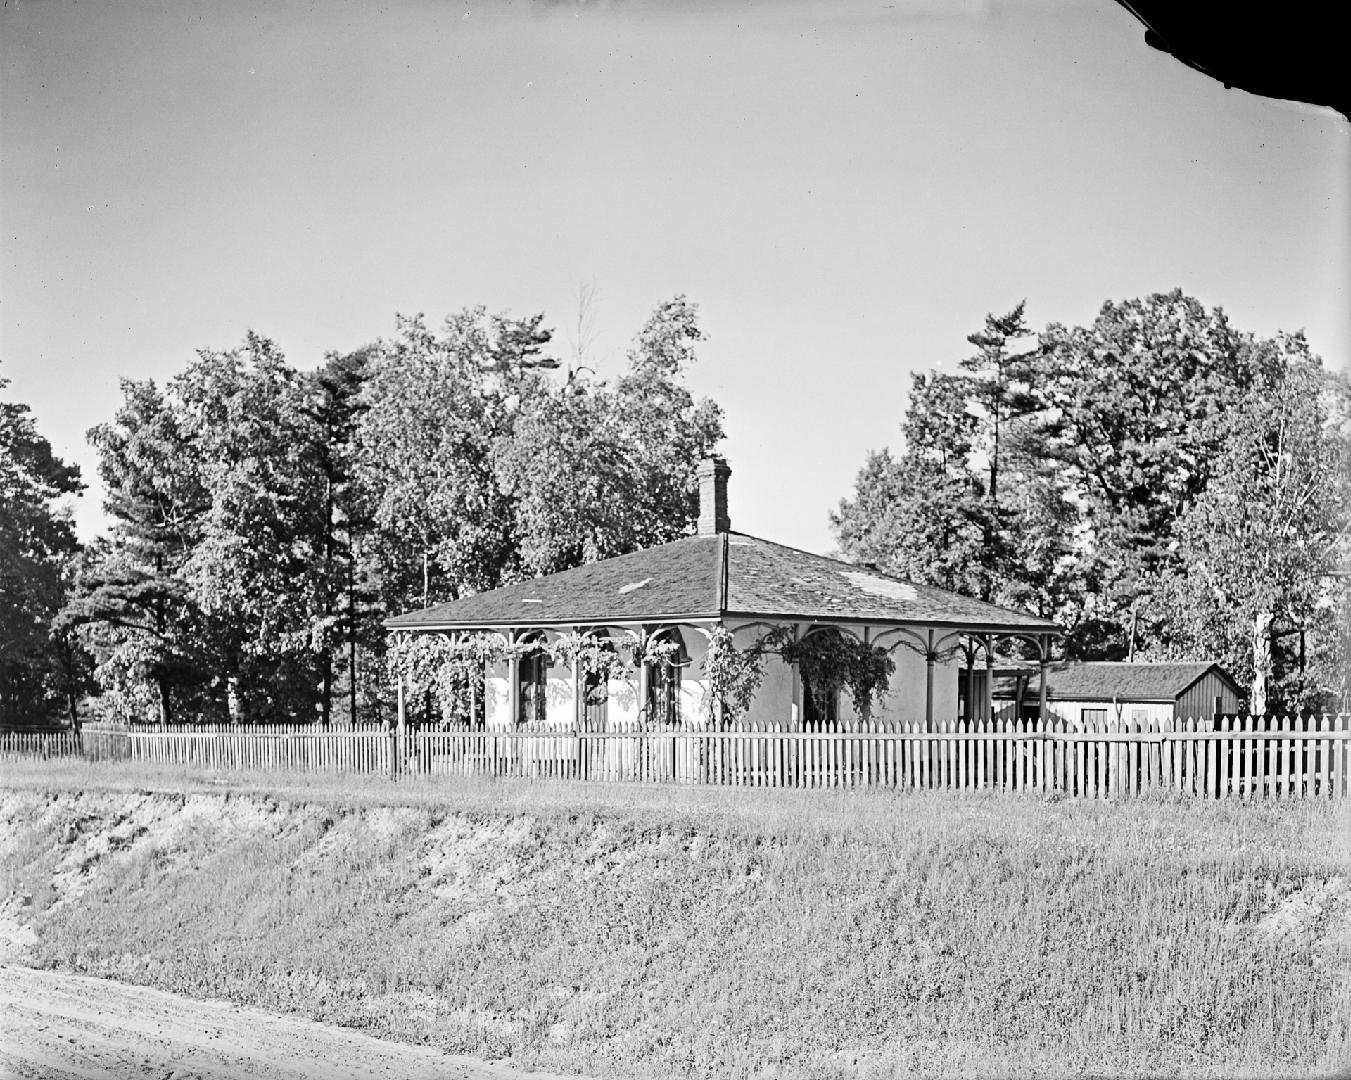 Image shows a cottage within a fenced area with some trees behind it.